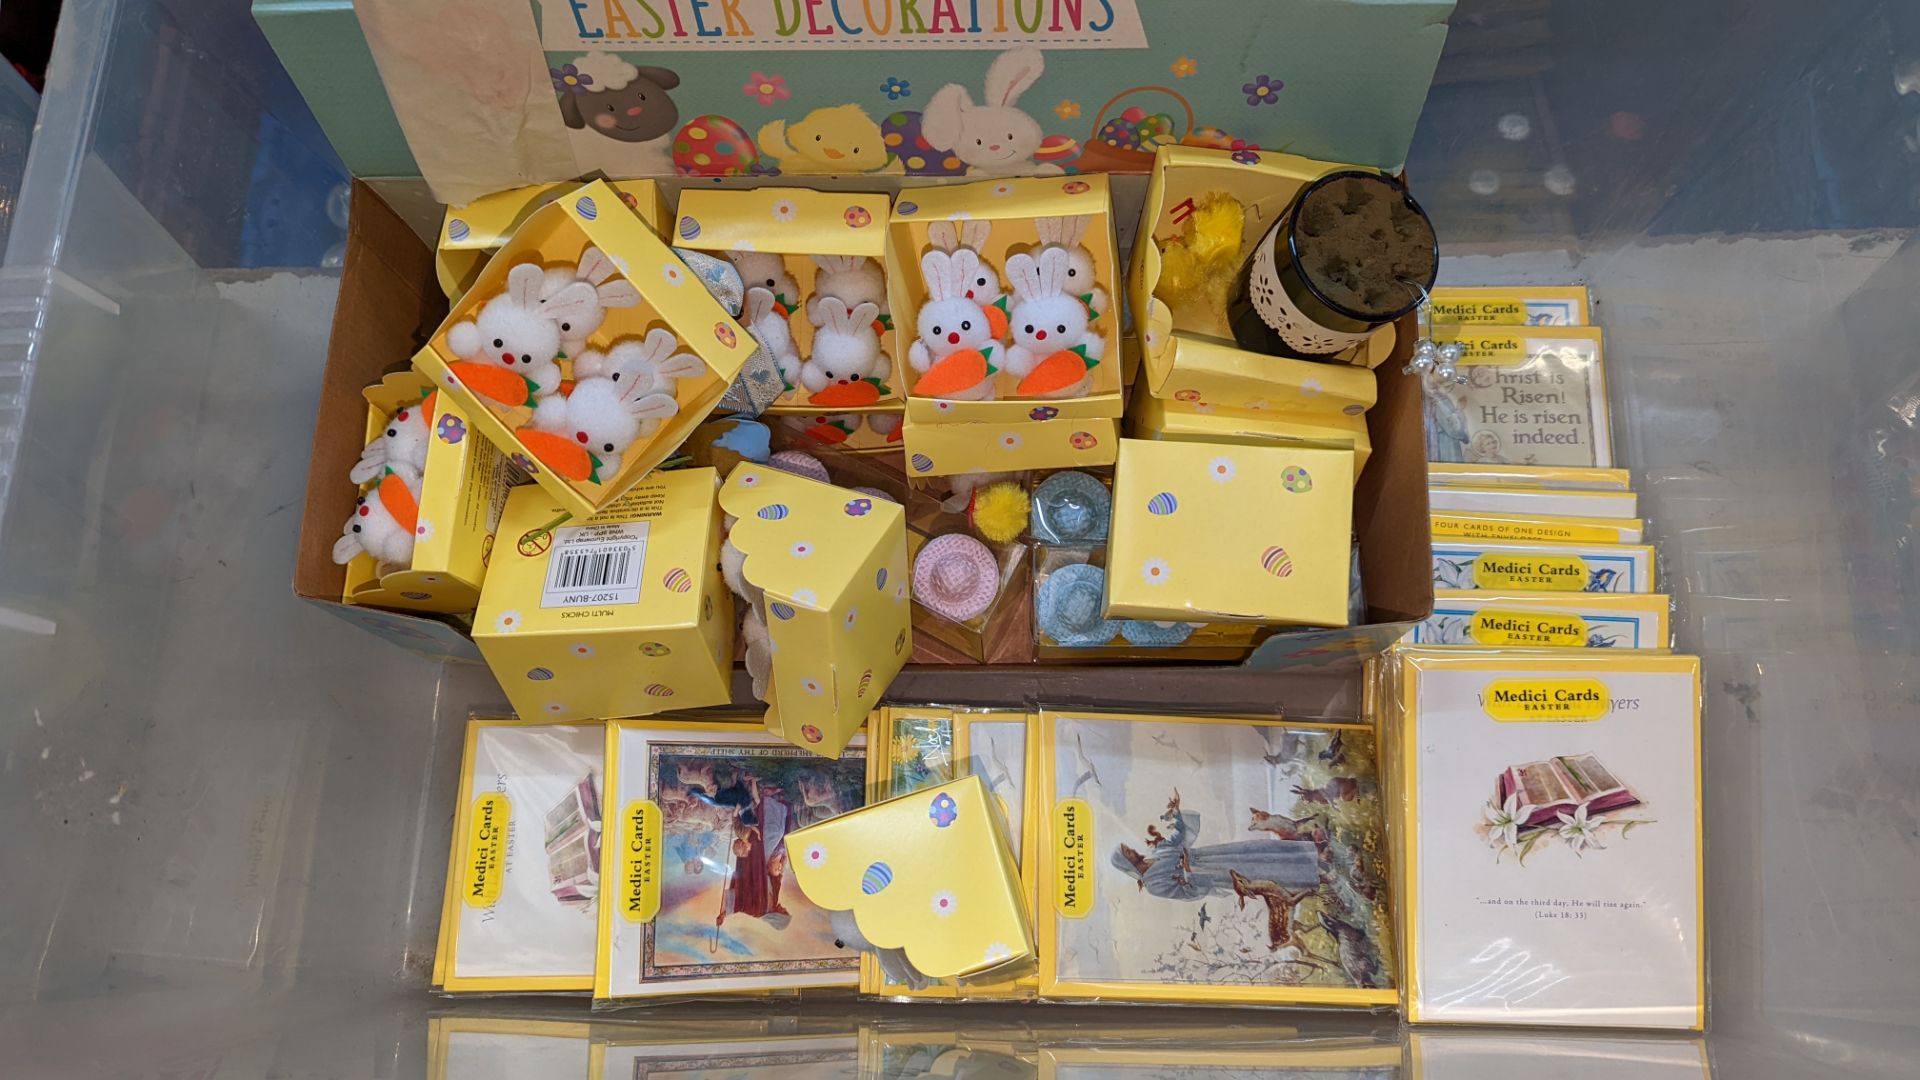 Contents of a crate of Easter decorations & cards - crate excluded - Image 3 of 4